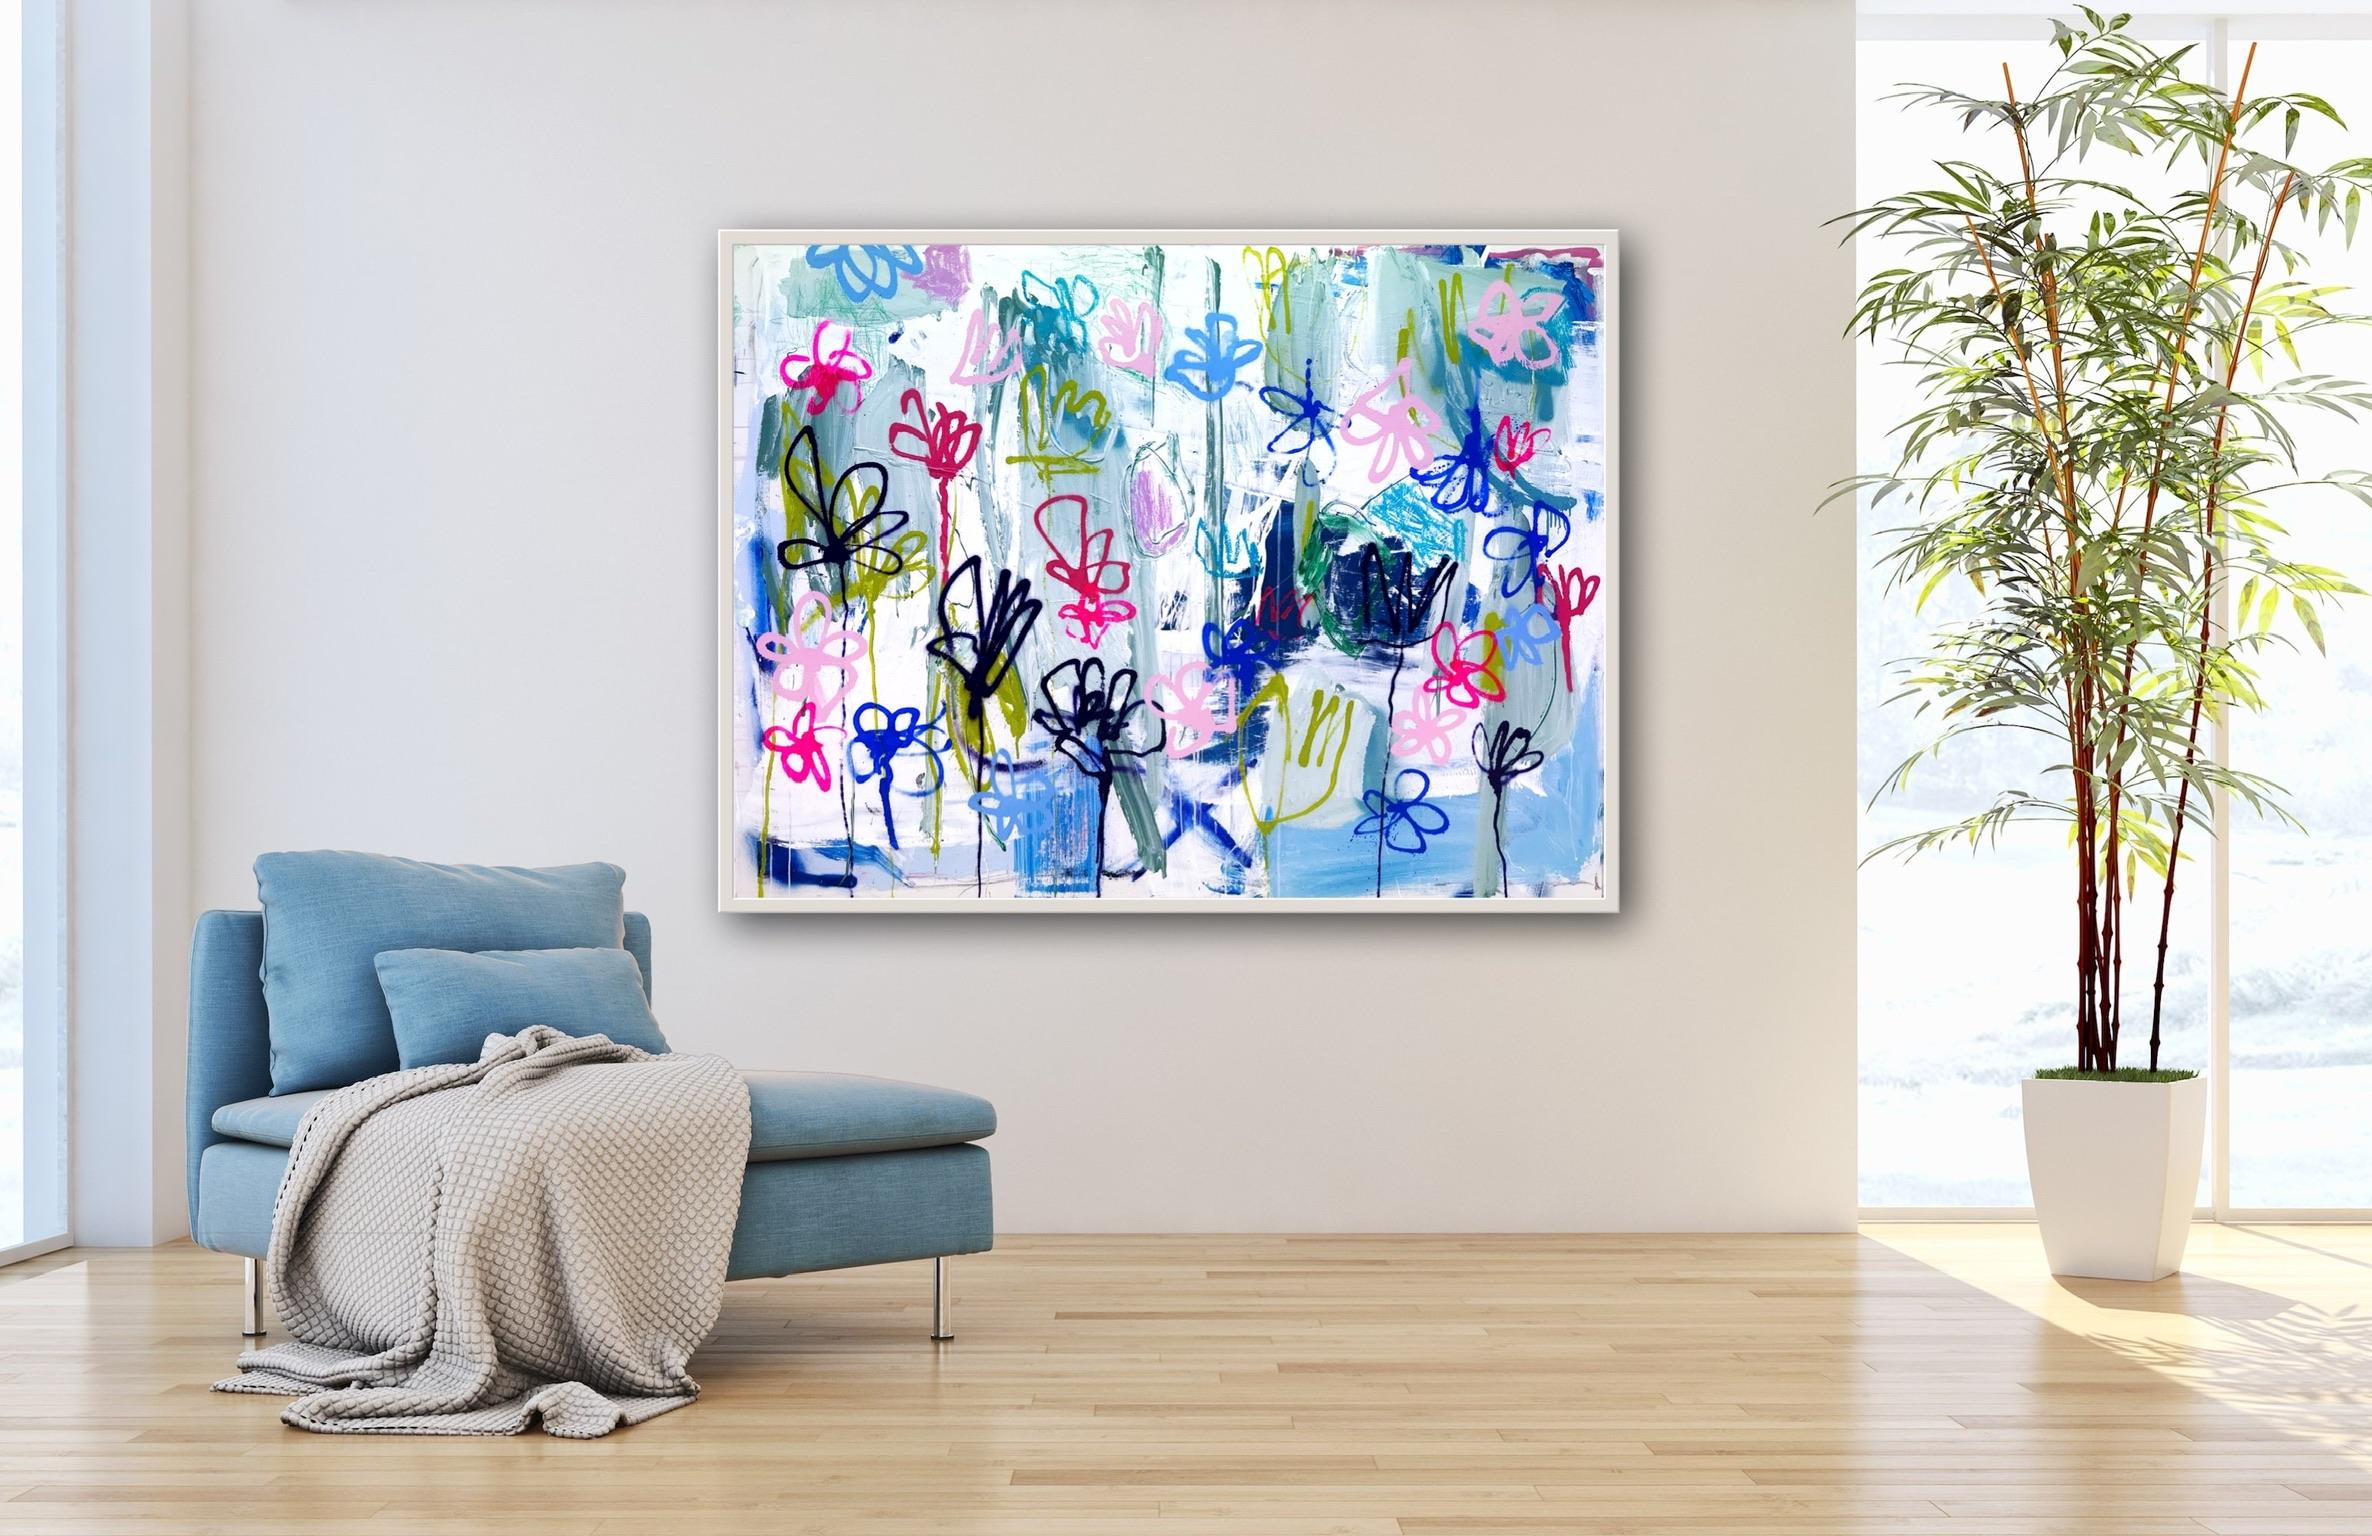 Free flowers for all (Abstract painting) - Painting by Manuela Karin Knaut